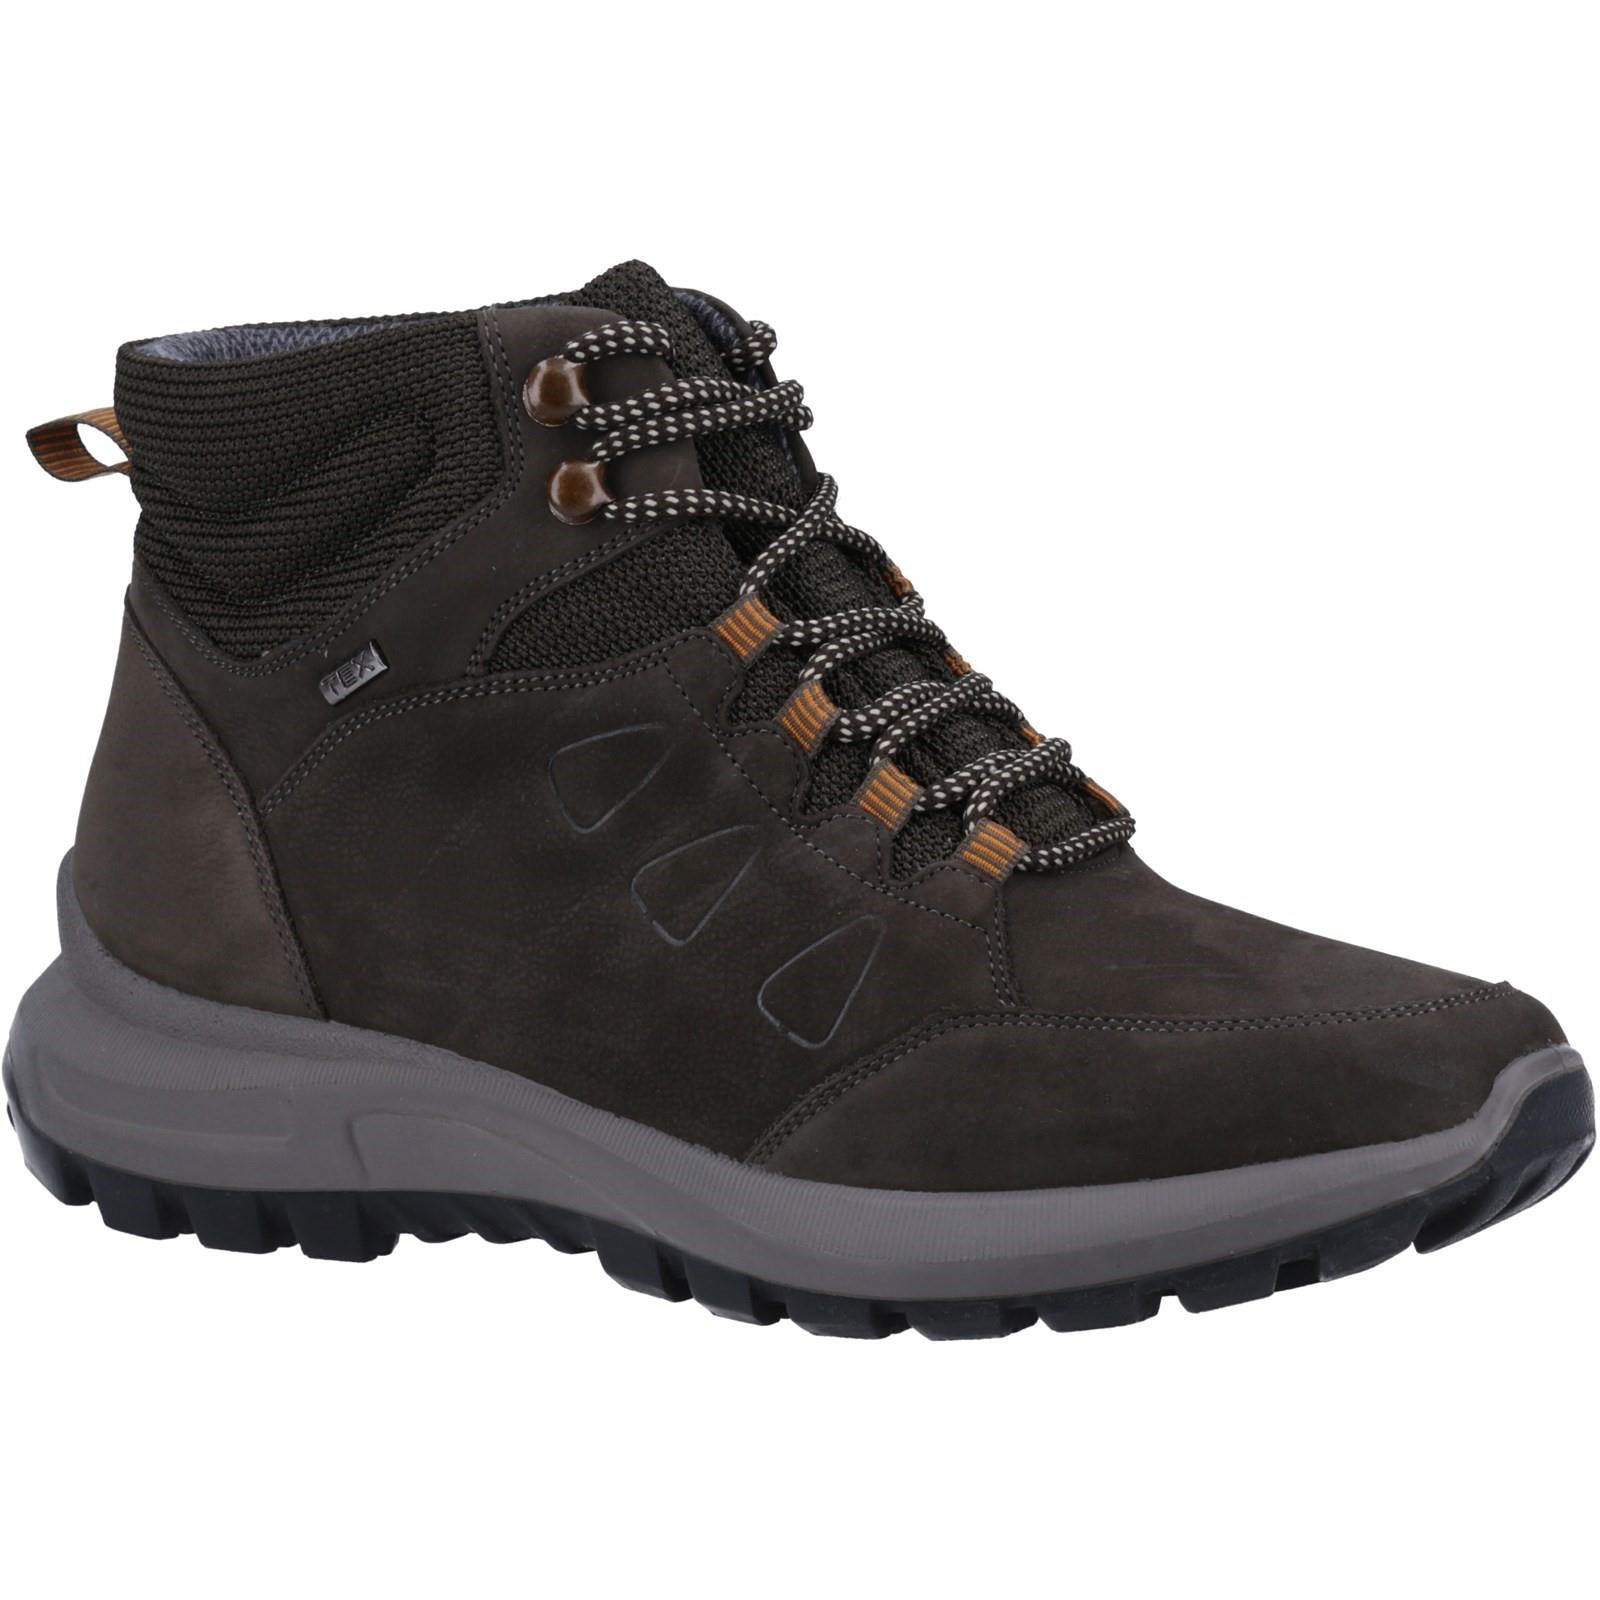 Cotswold Dixton brown waterproof lace up walking hiking boots